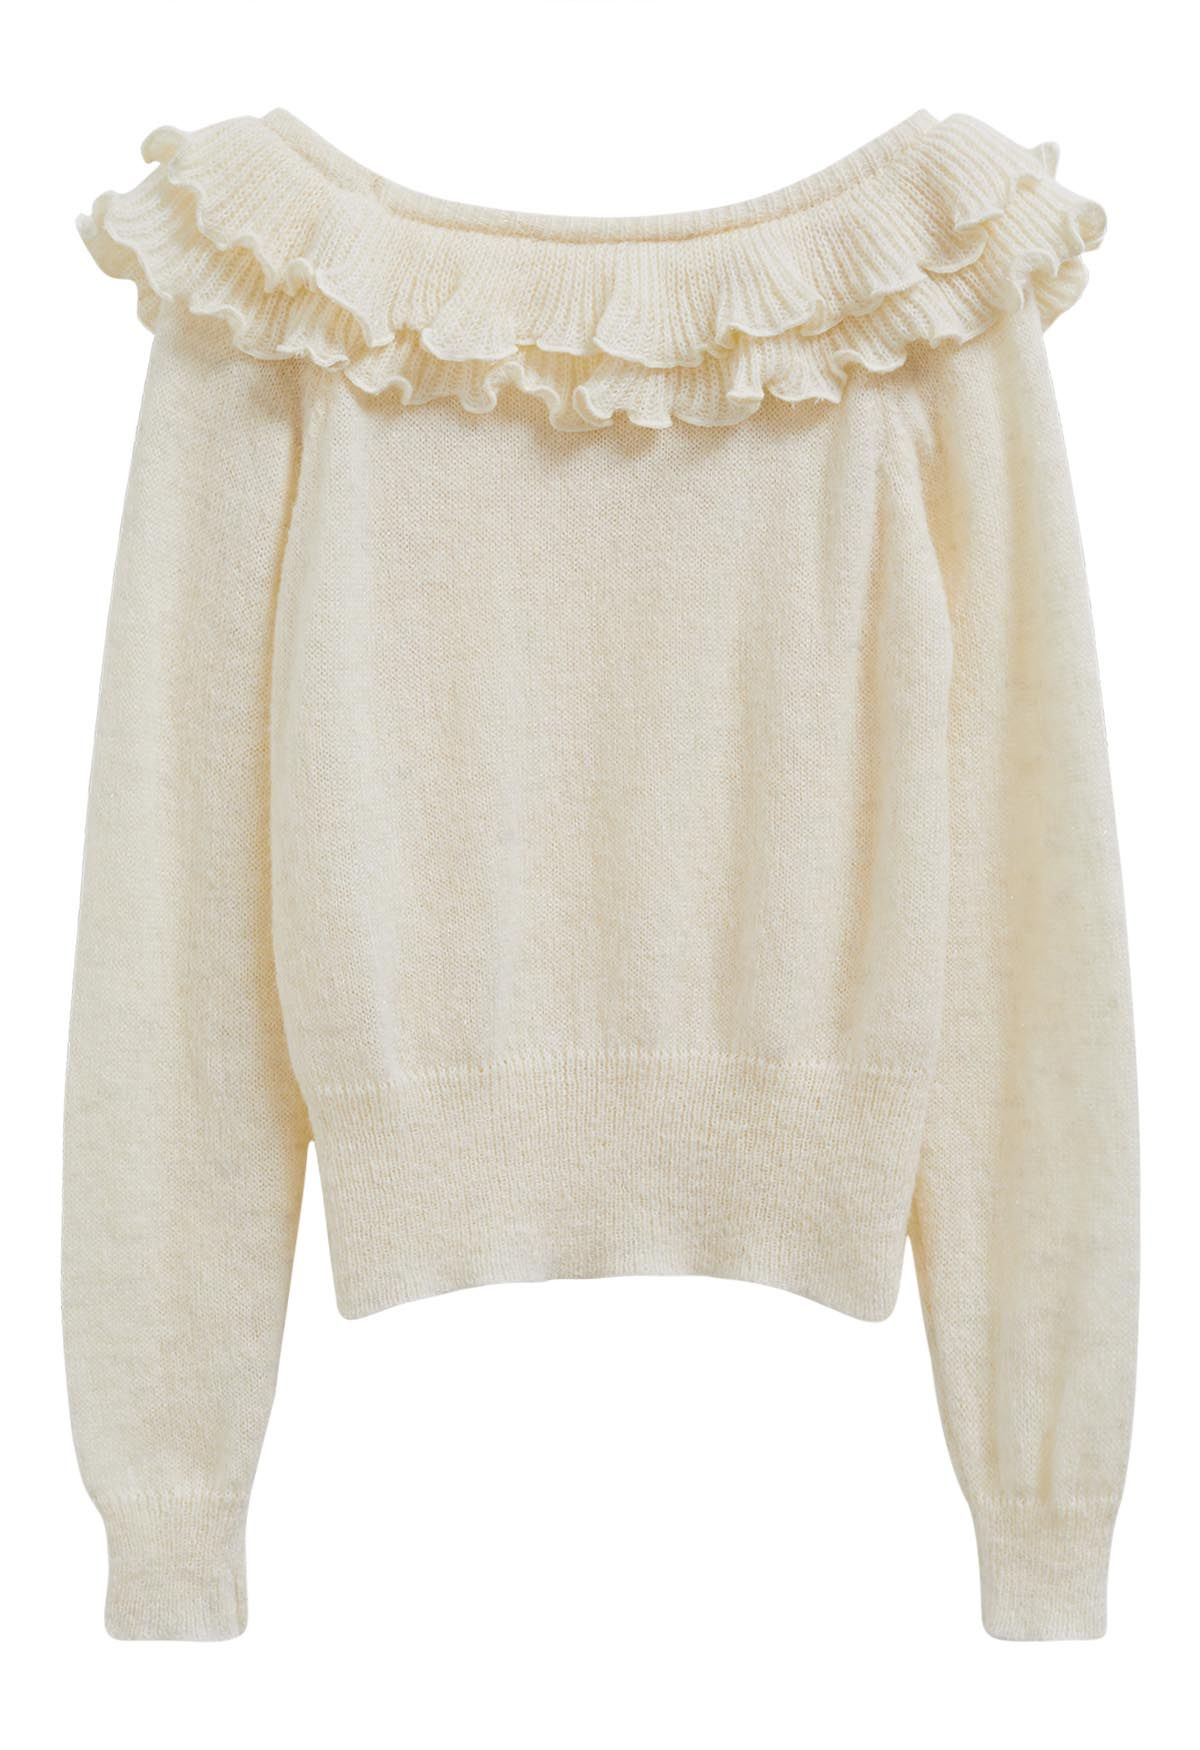 Shimmering Tiered Ruffle Off-Shoulder Knit Sweater in Cream